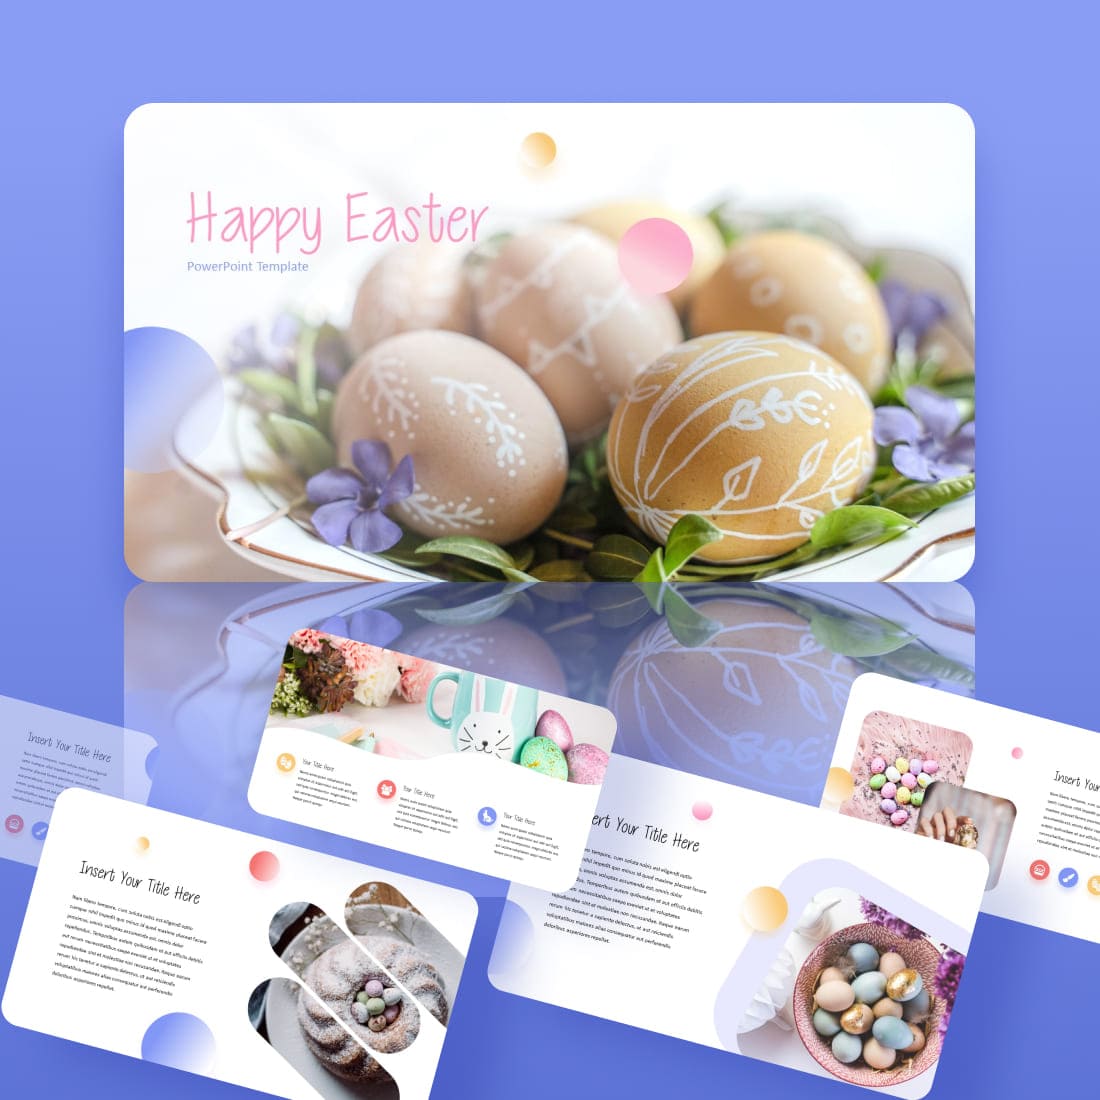 Easter Powerpoint Template, main picture 1100x1100.